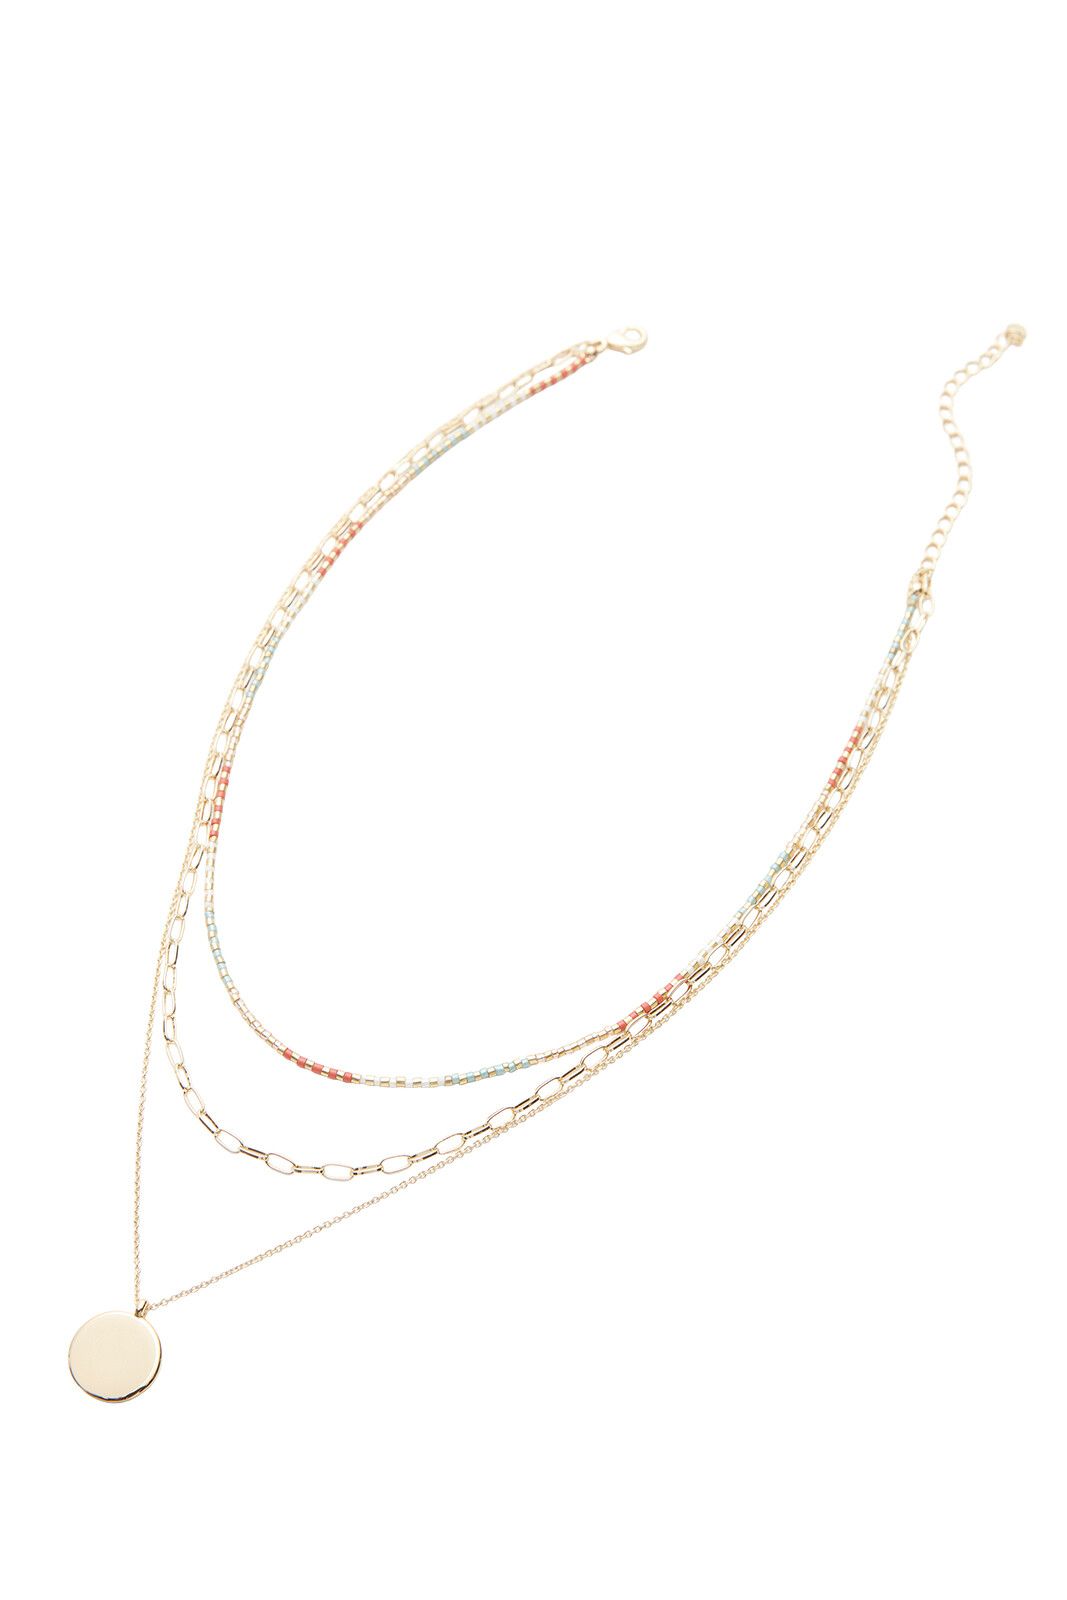 EVEREVE Rory Beaded Coin Necklace | EVEREVE | Evereve